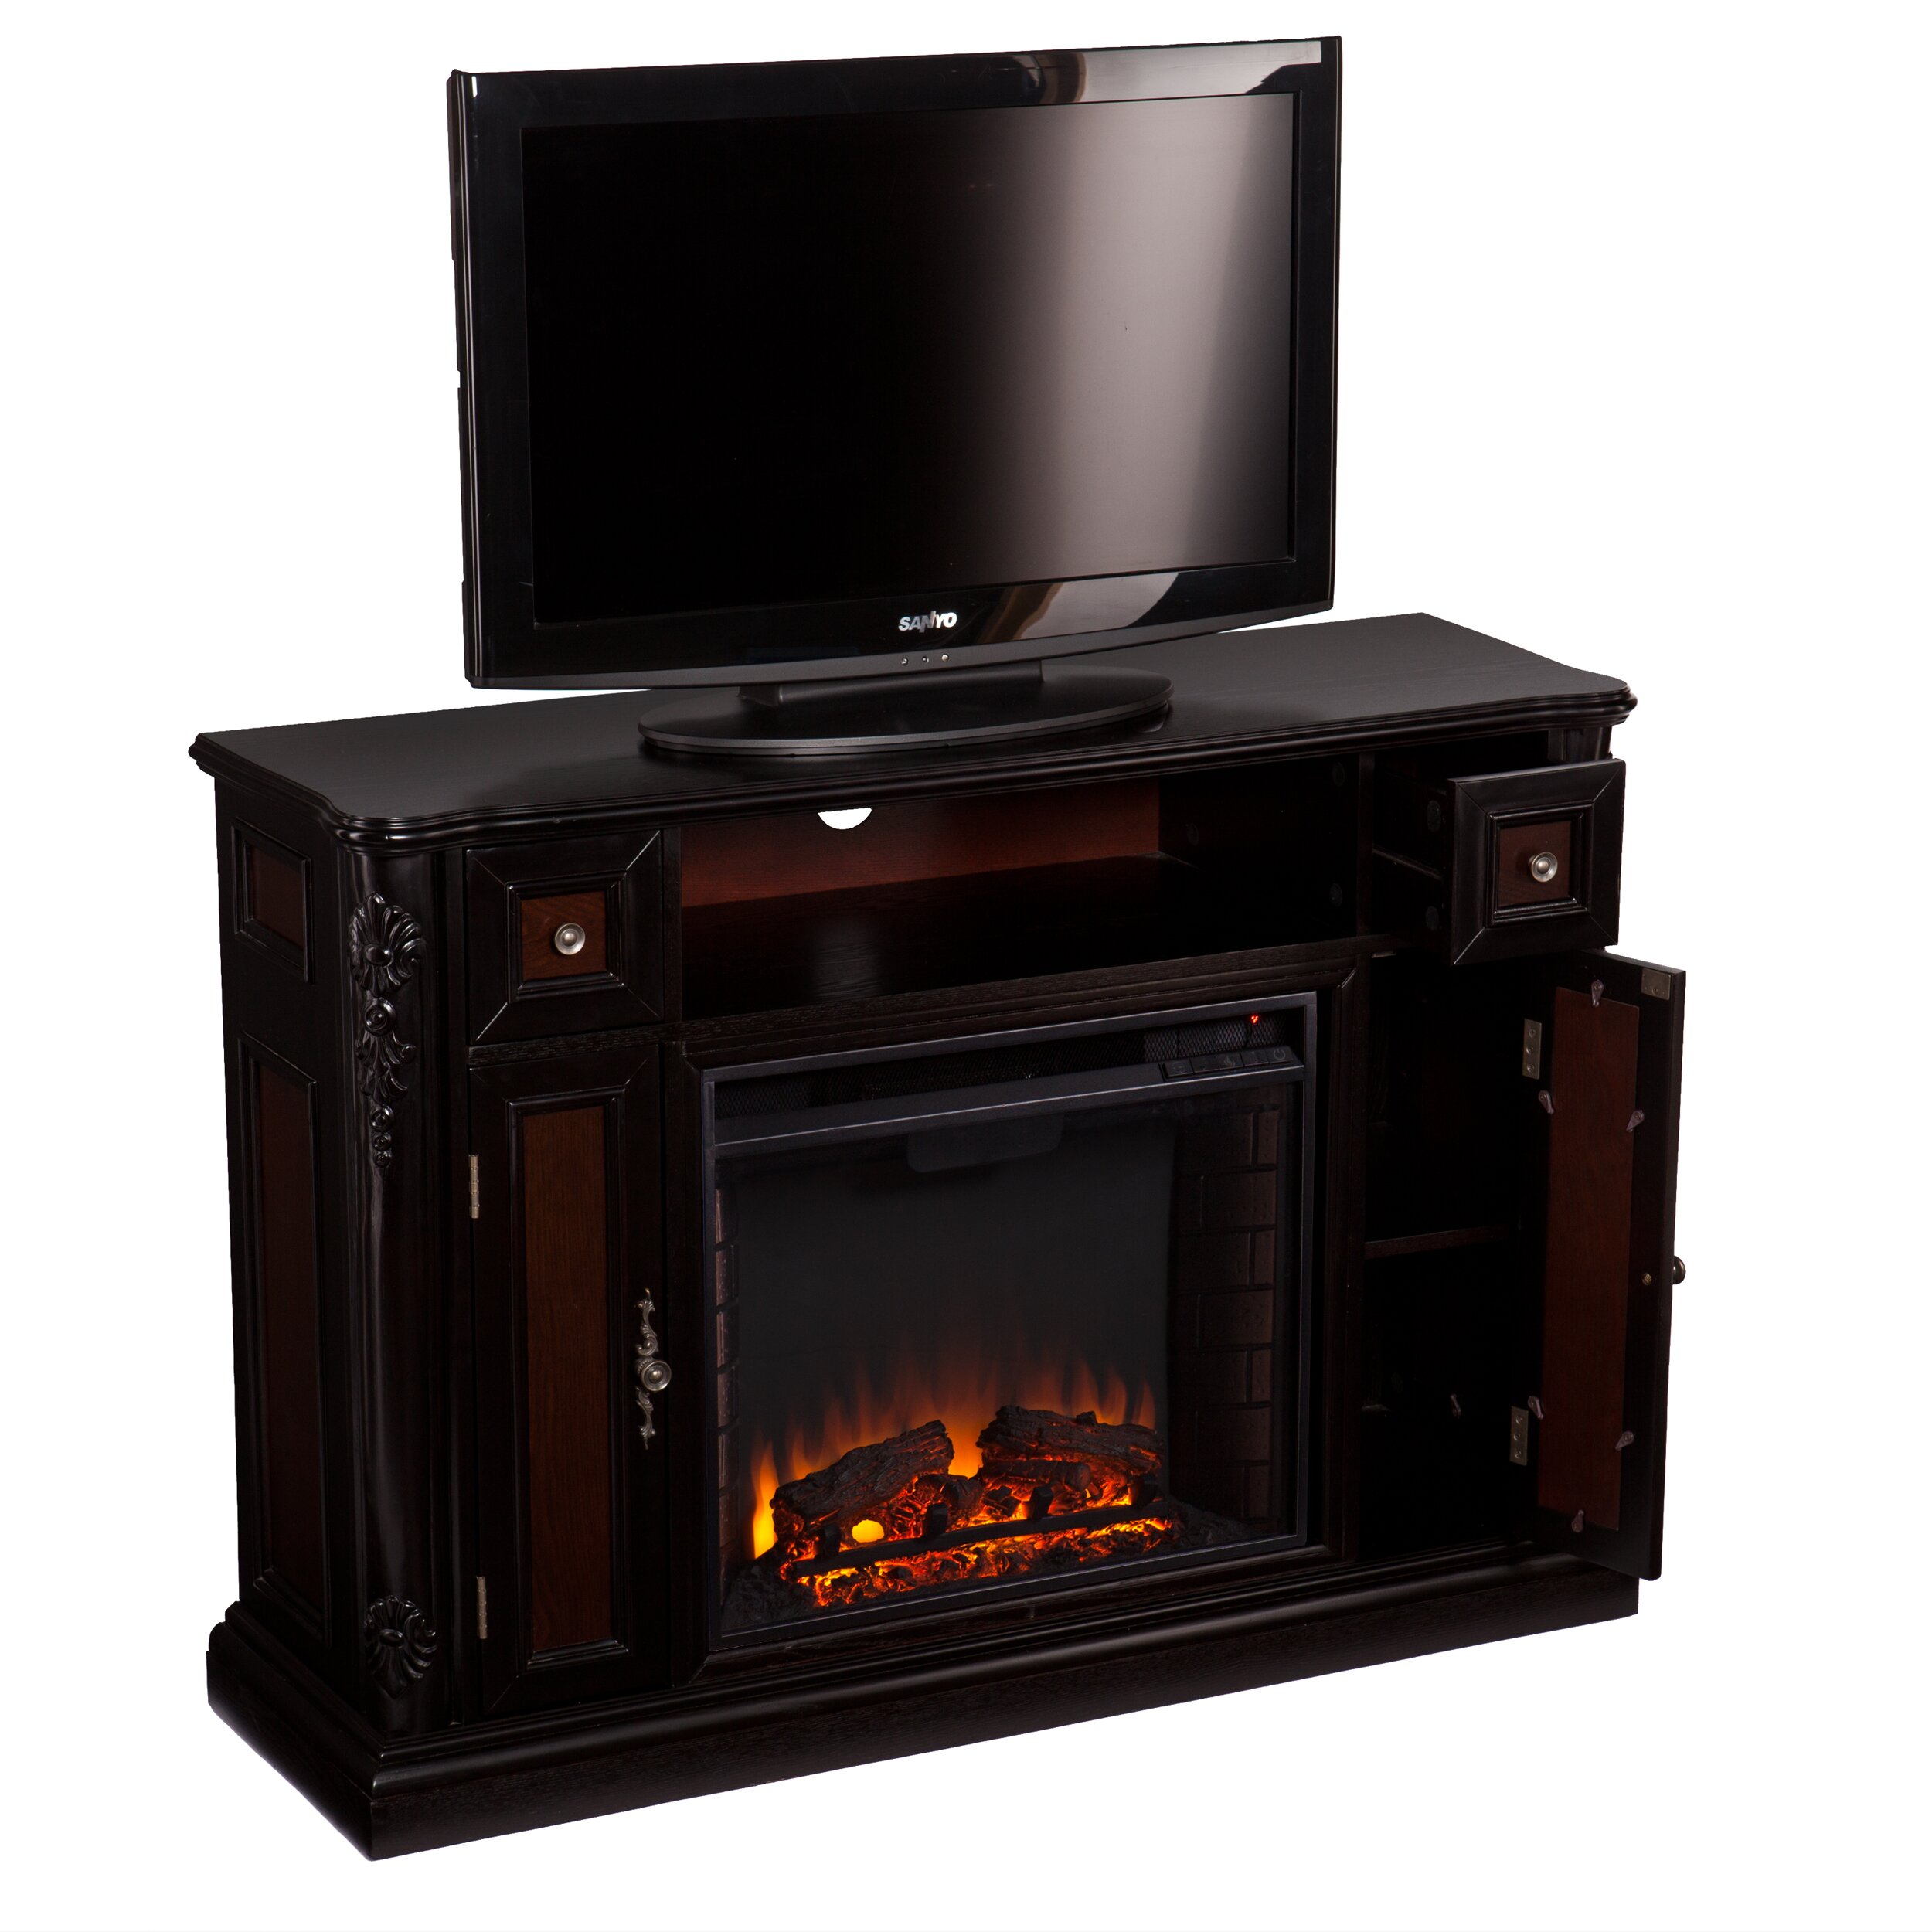 Wildon Home ® Gibbs TV Stand with Electric Fireplace ...